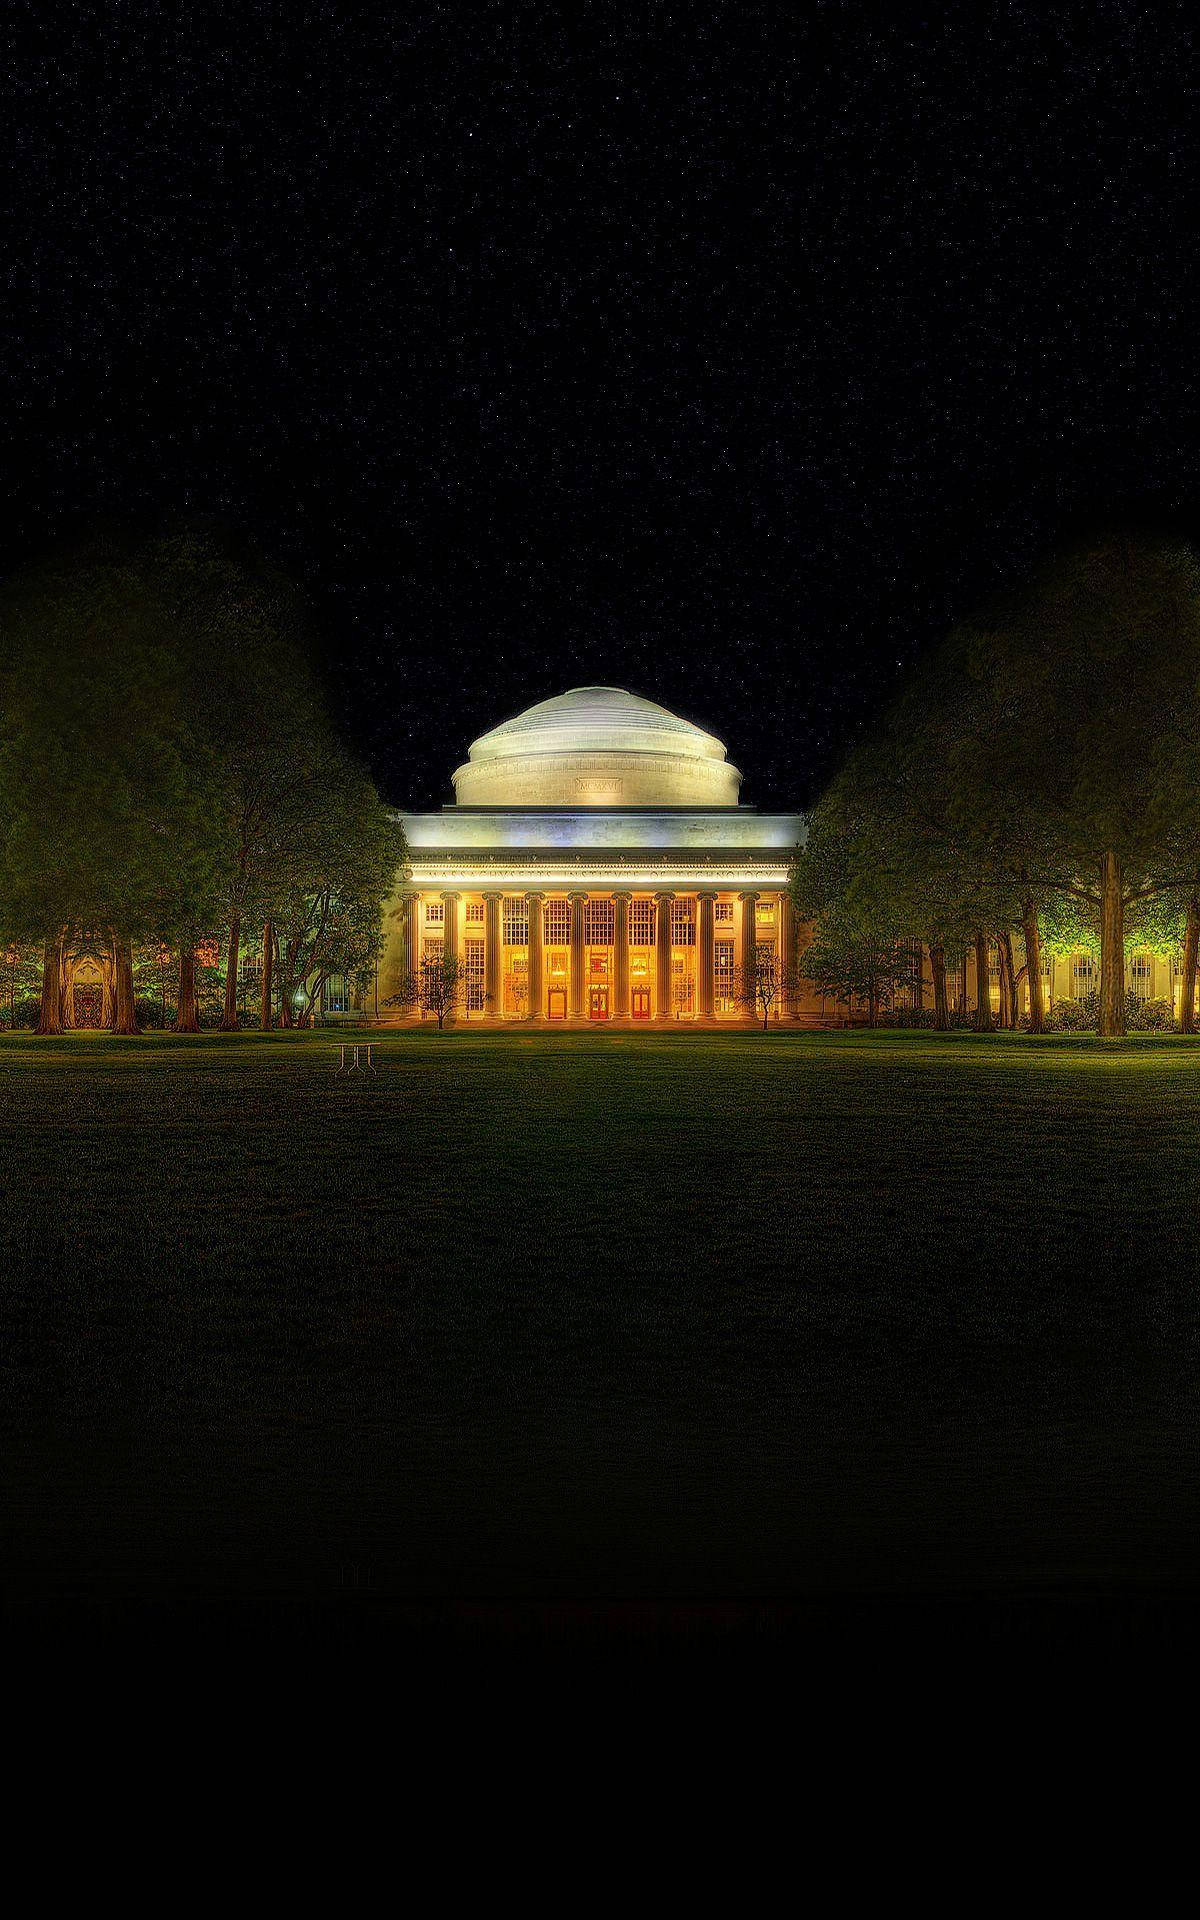 Mit Great Dome With Lights At Night Wallpaper